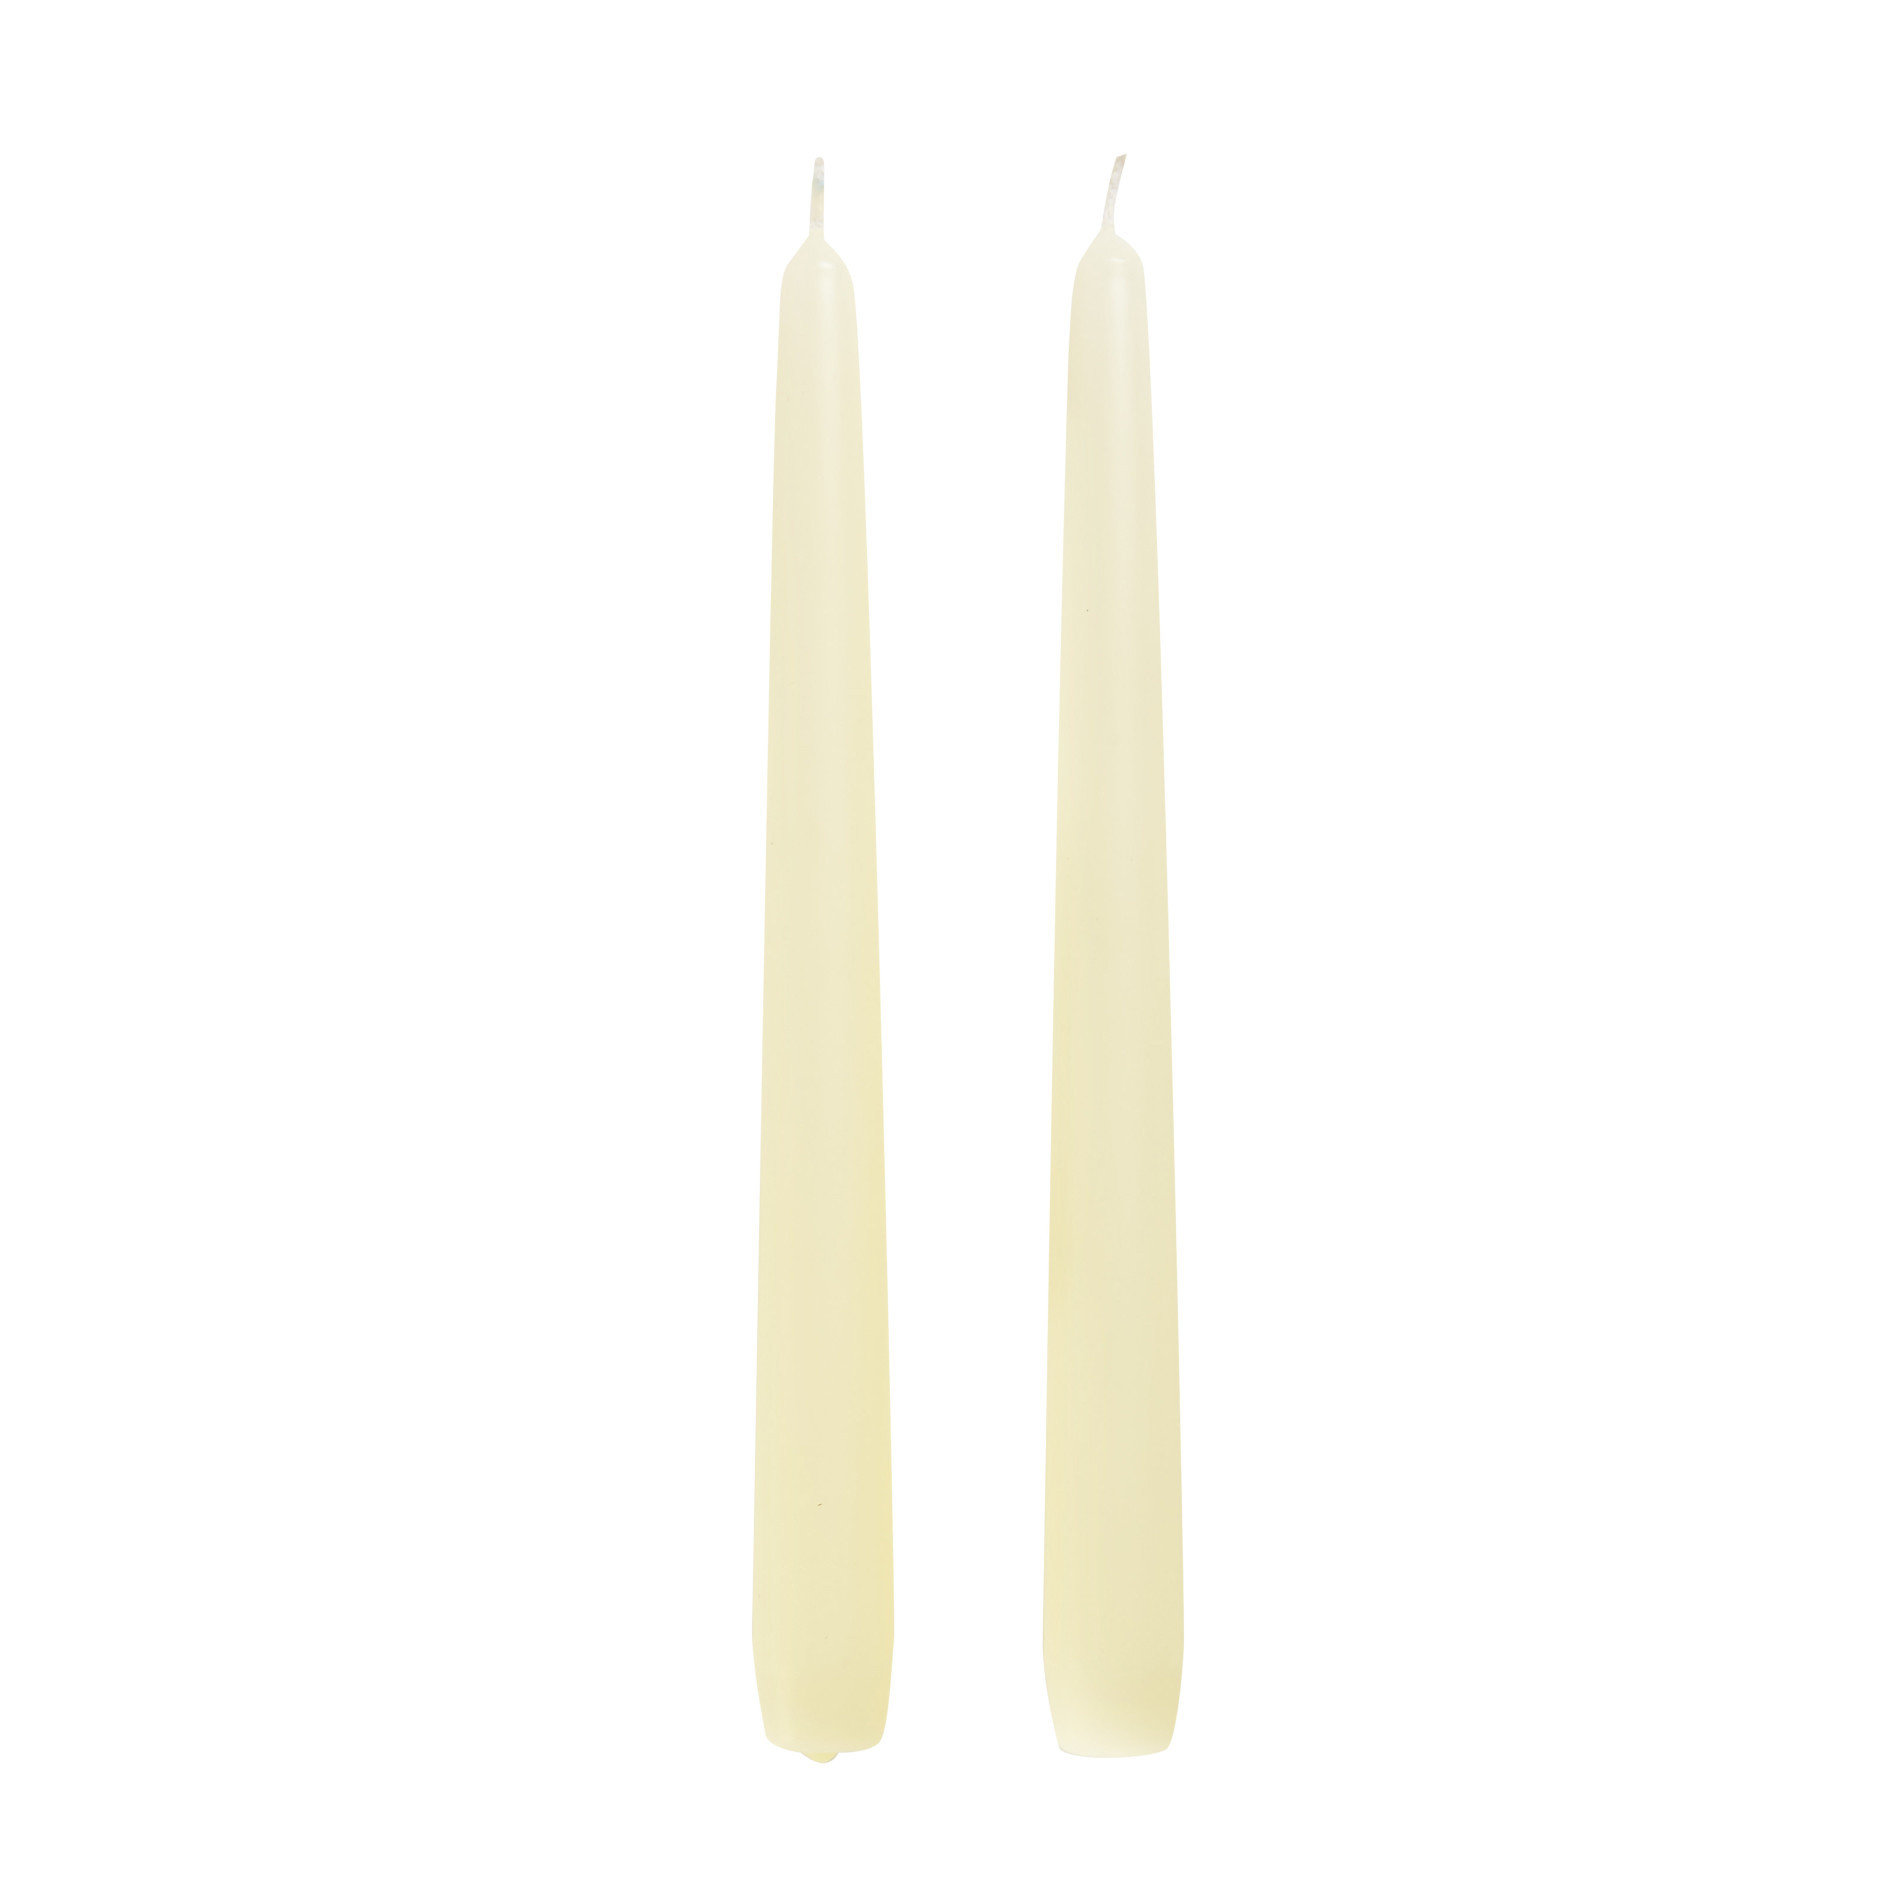 Set 2 candele coniche opache, Beige, large image number 0